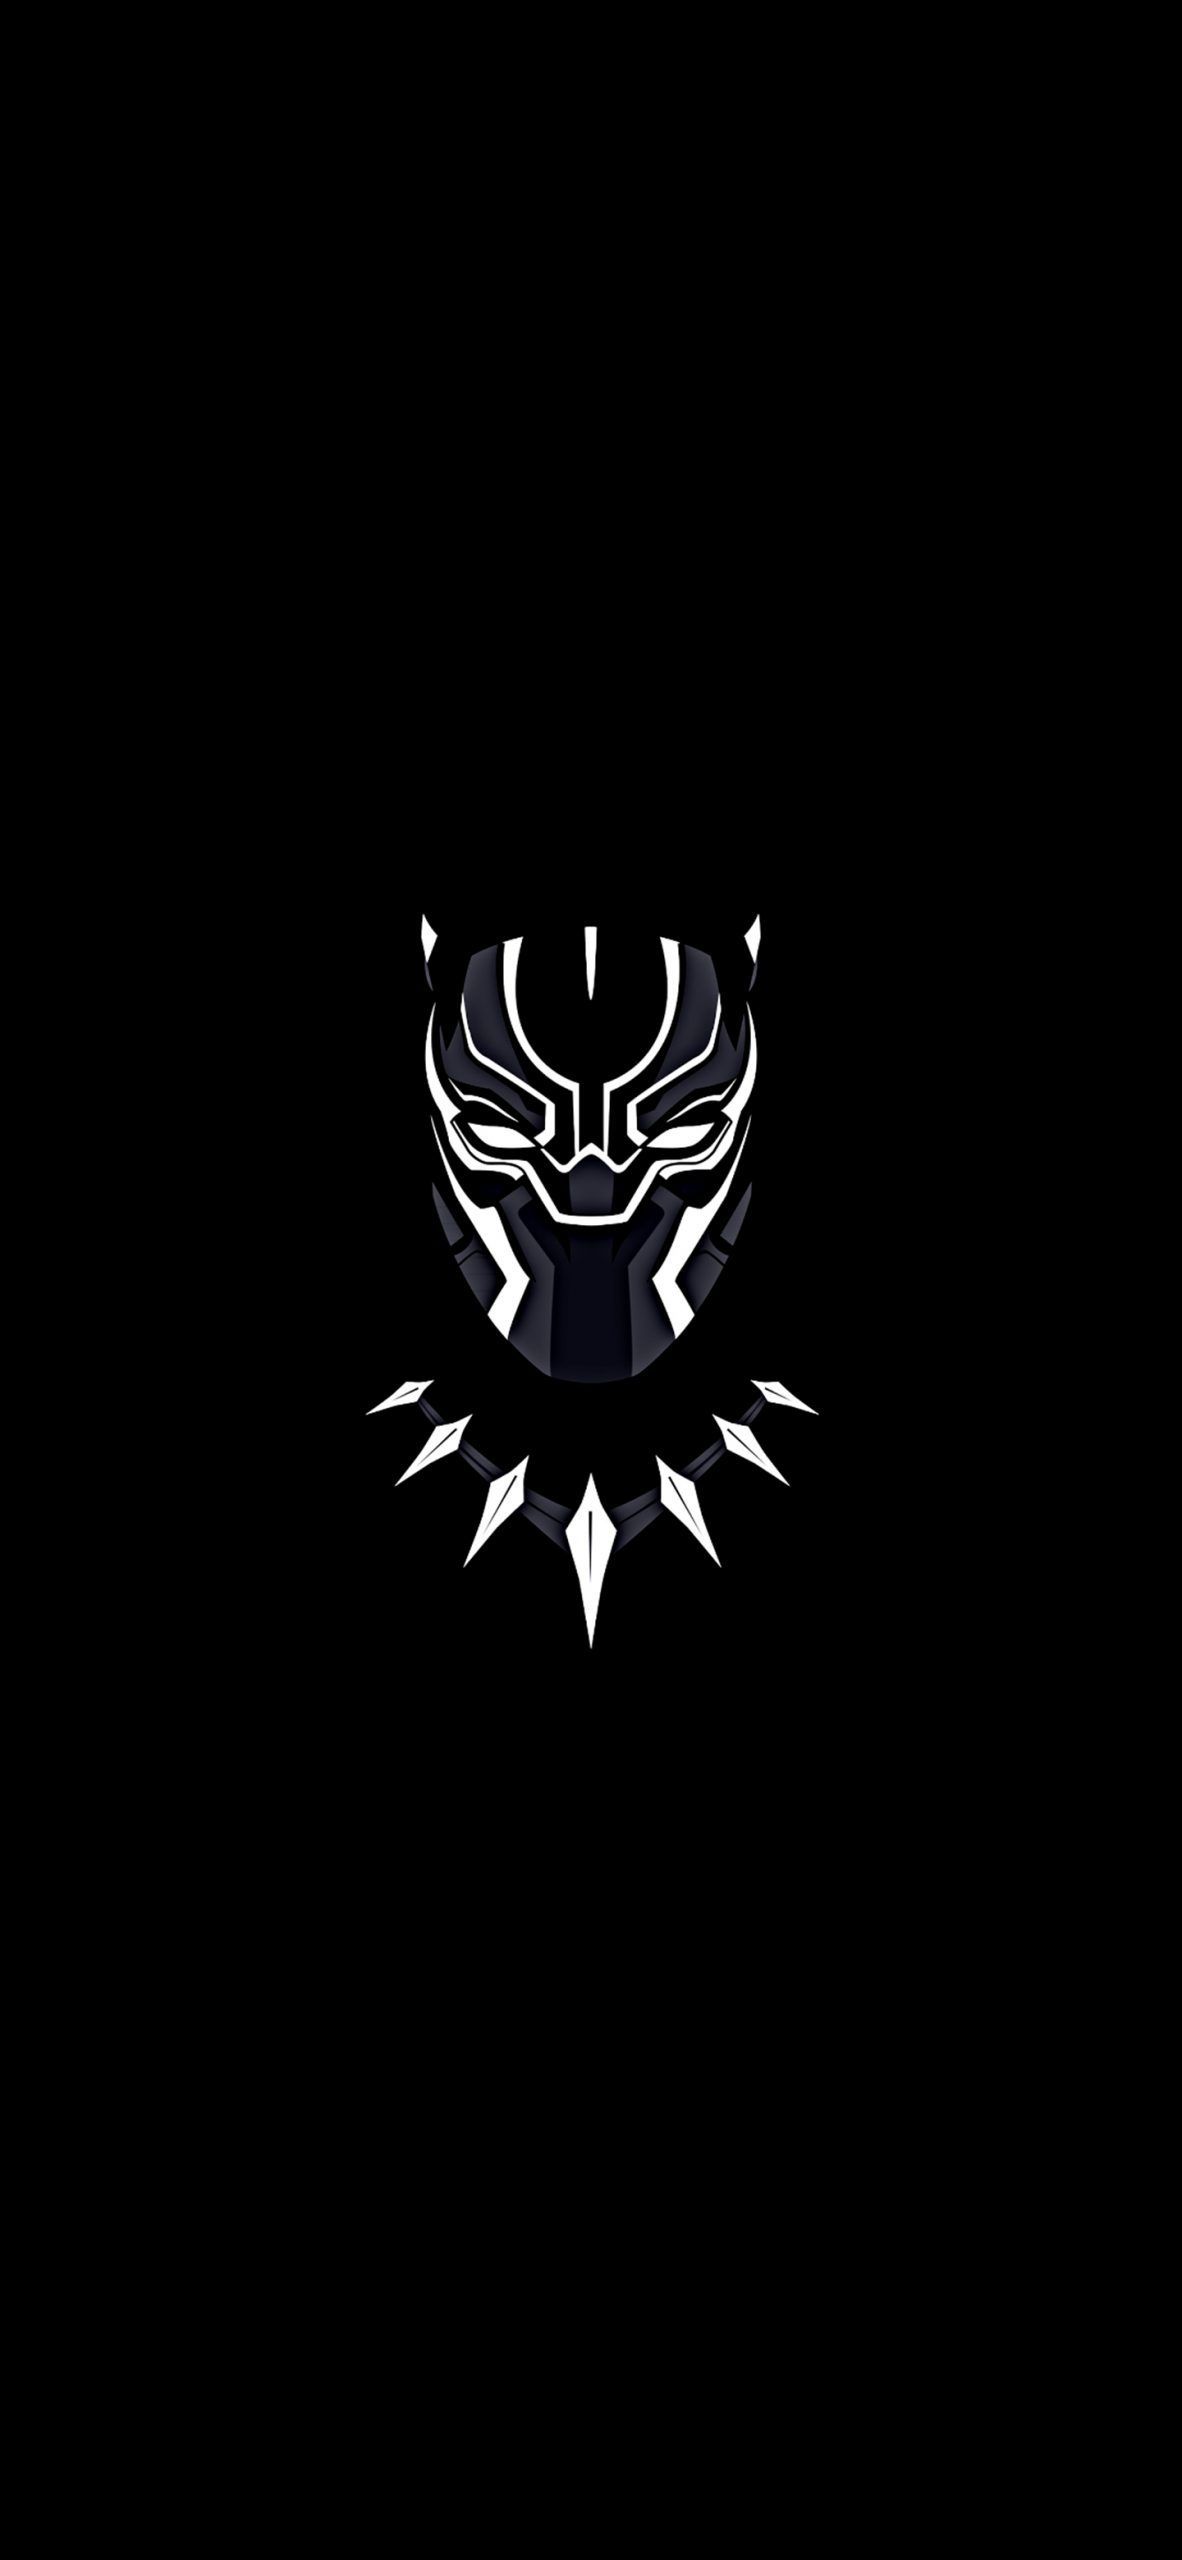 Black Panther Amoled Wallpapers - Wallpaper Cave